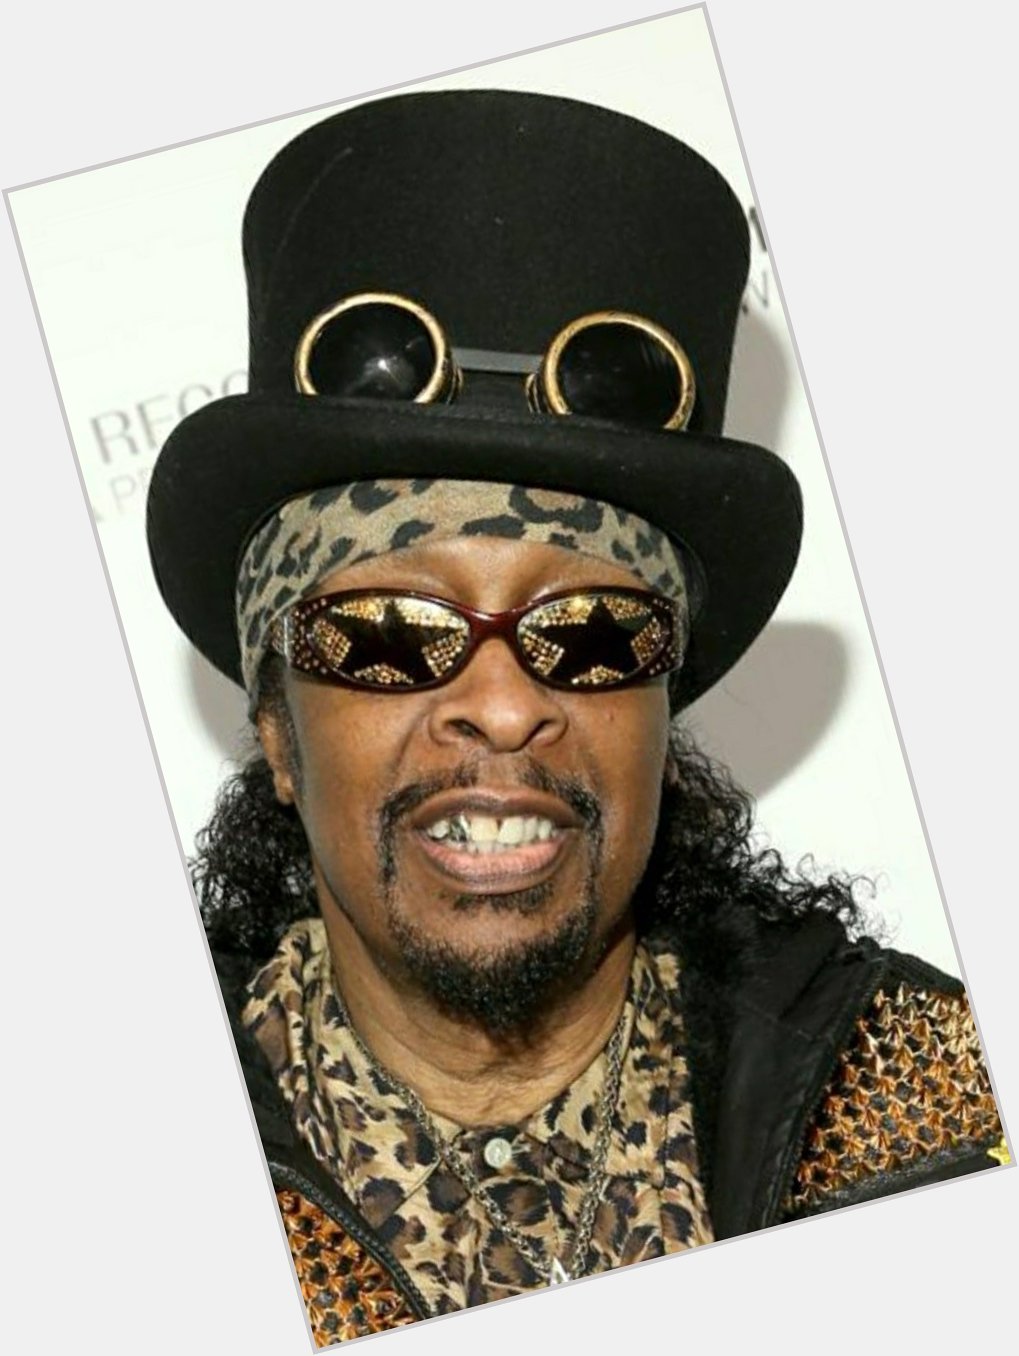 Happy birthday to funk legend, bassist for James Brown, Parliament & Funkadelic, Bootzilla - Bootsy Collins. 